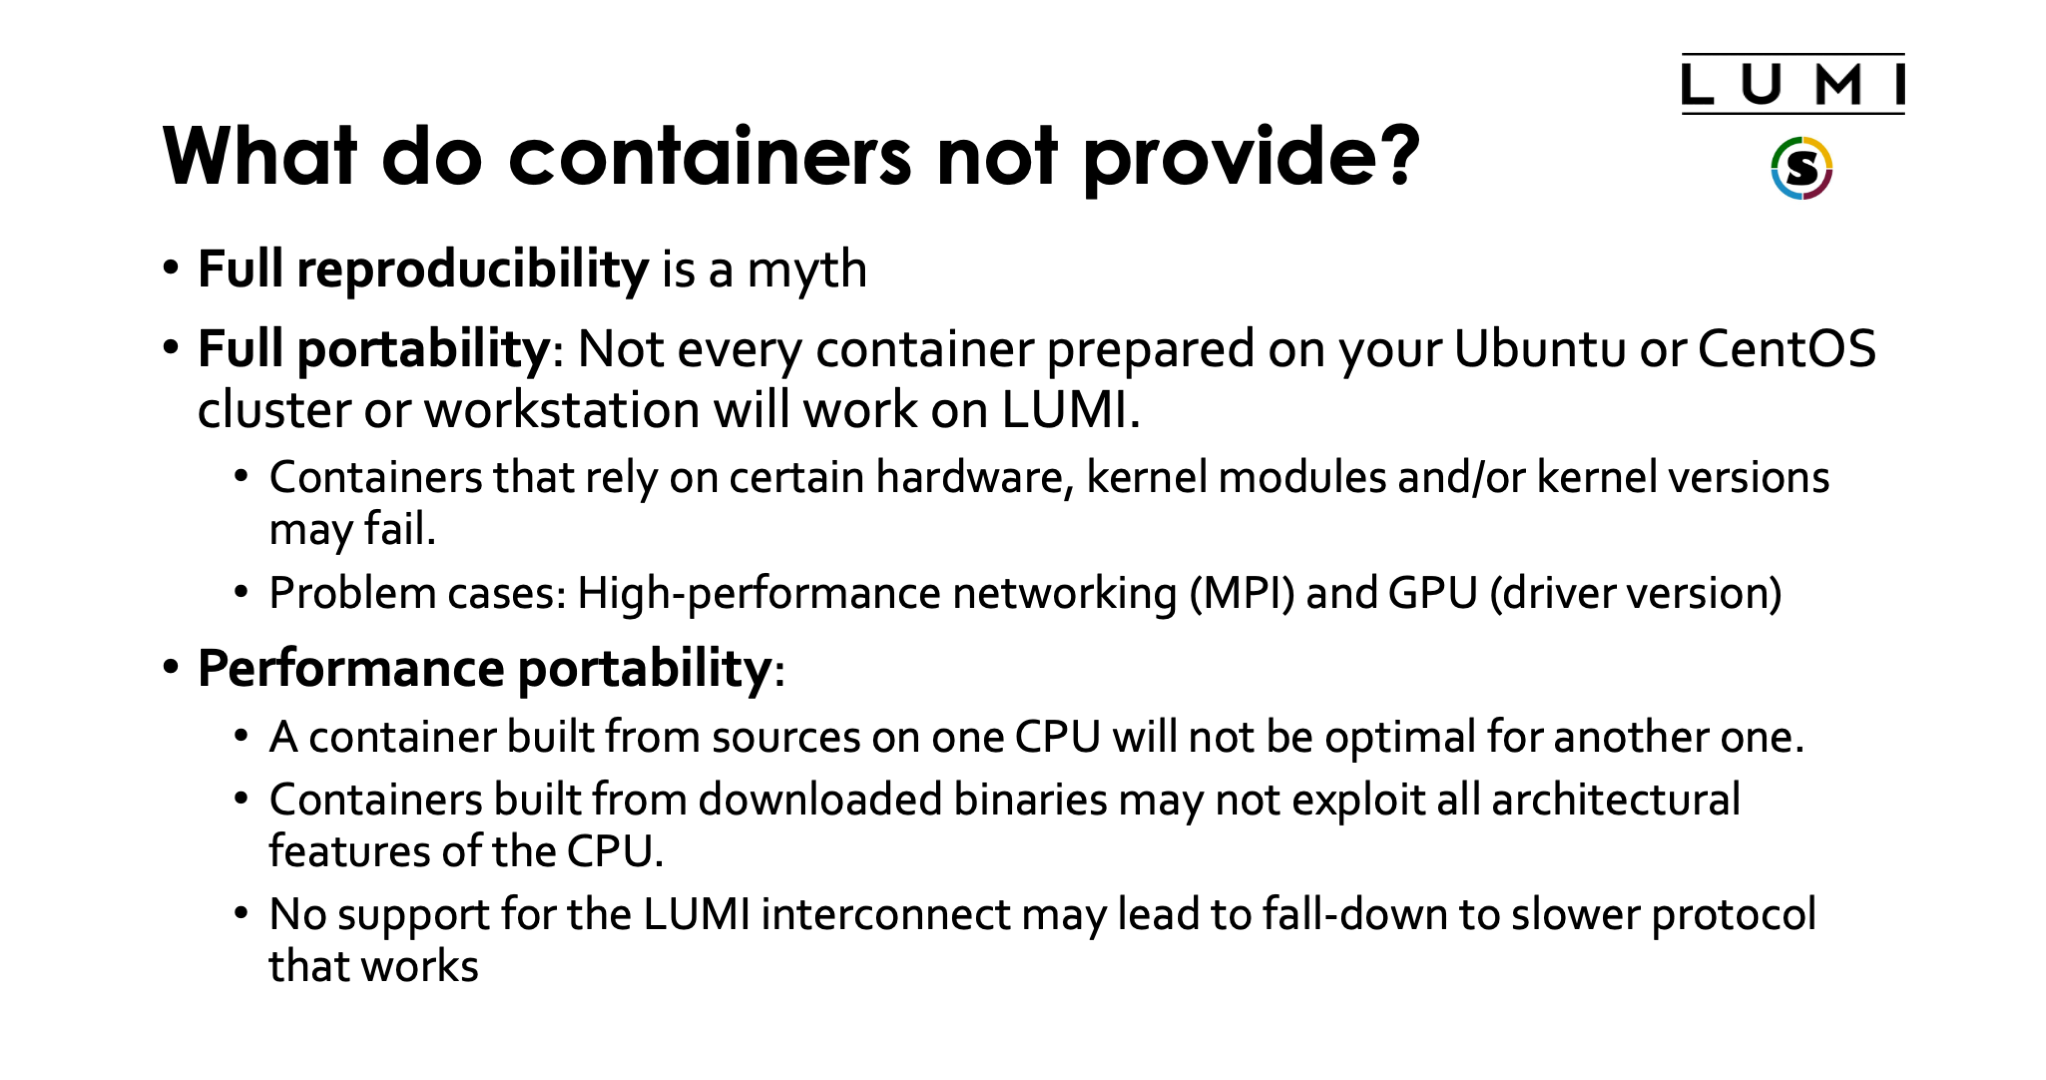 What do containers not provide